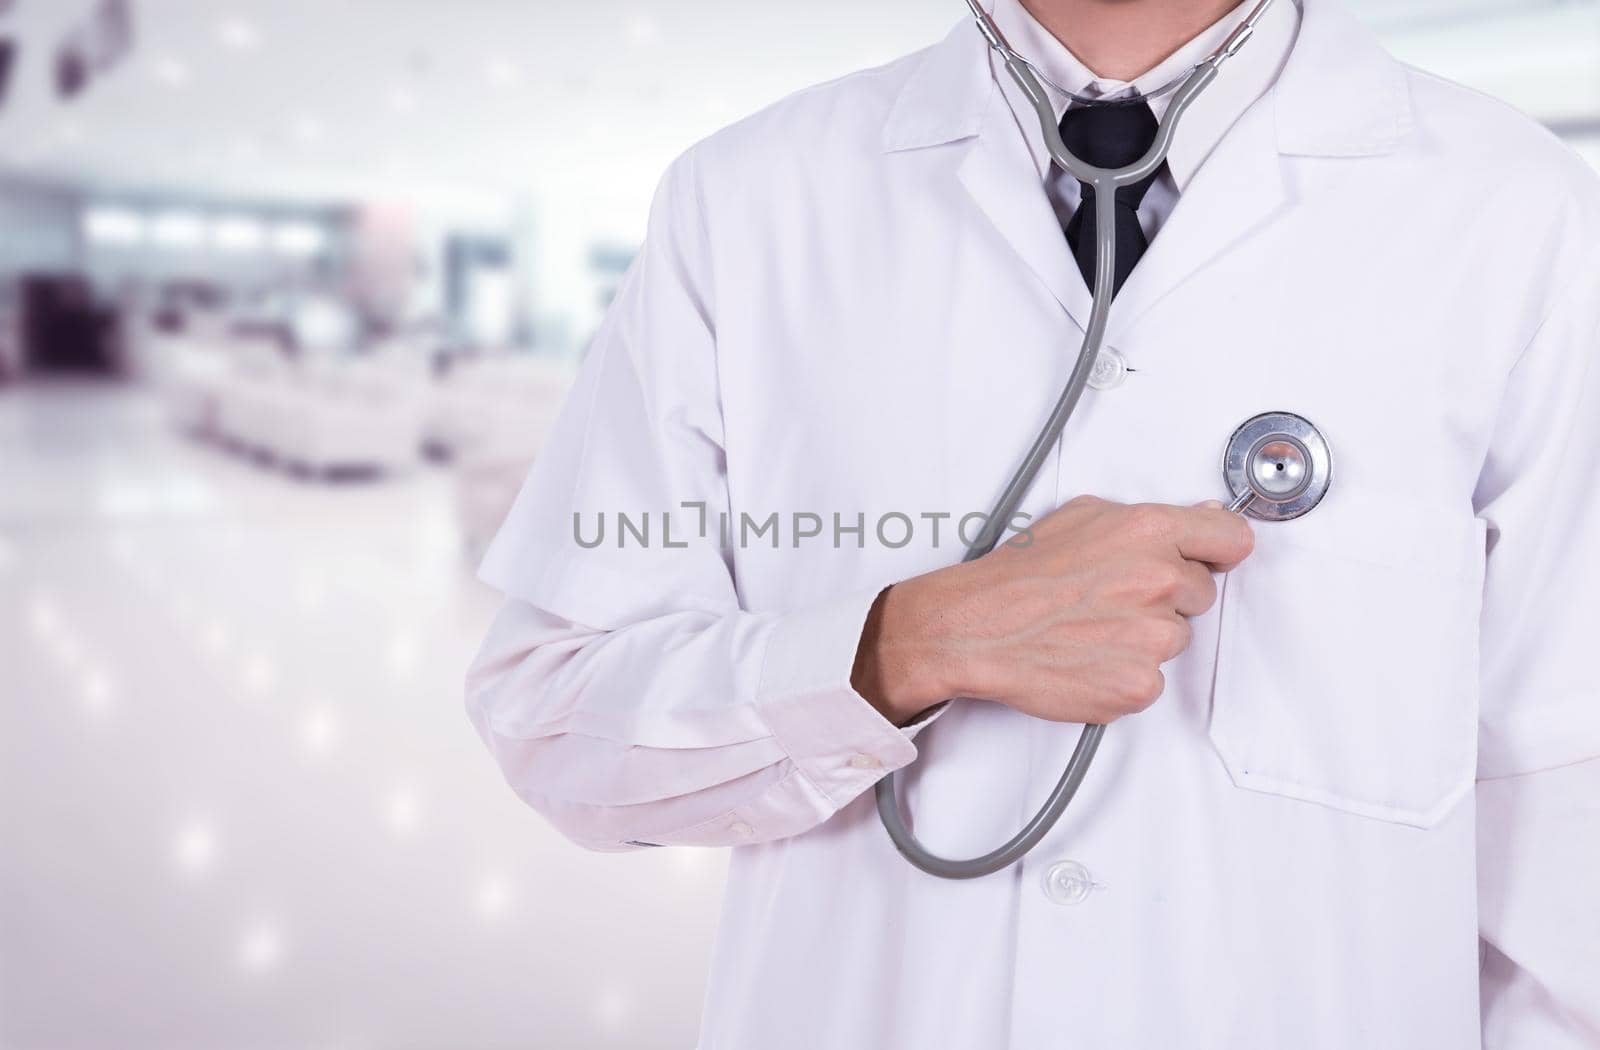 doctor listening his heart with stethoscope in hospital background